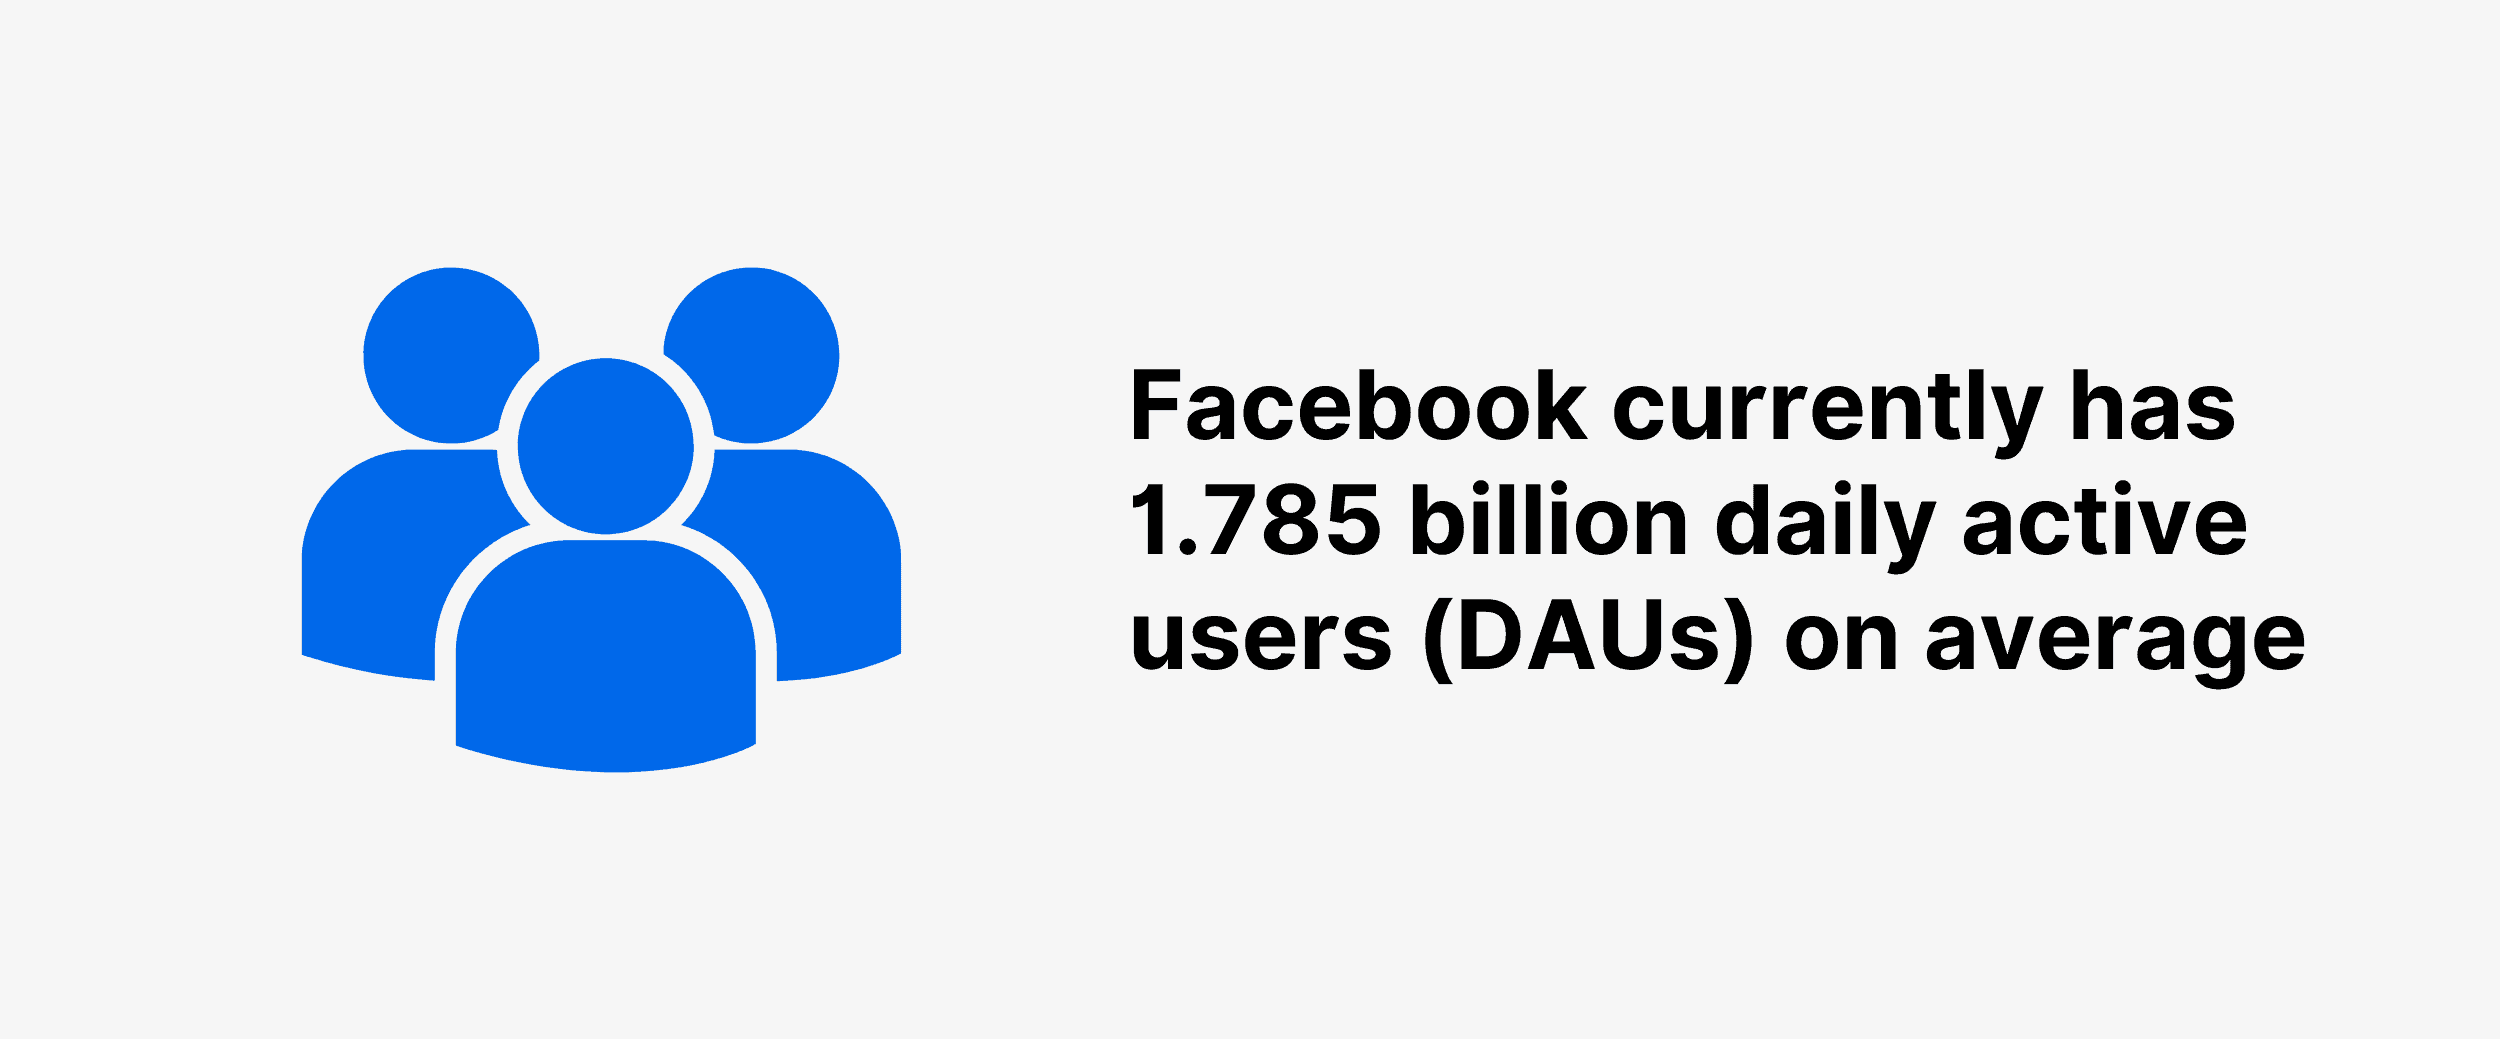 Facebook currently has 1.785 billion daily active users on average